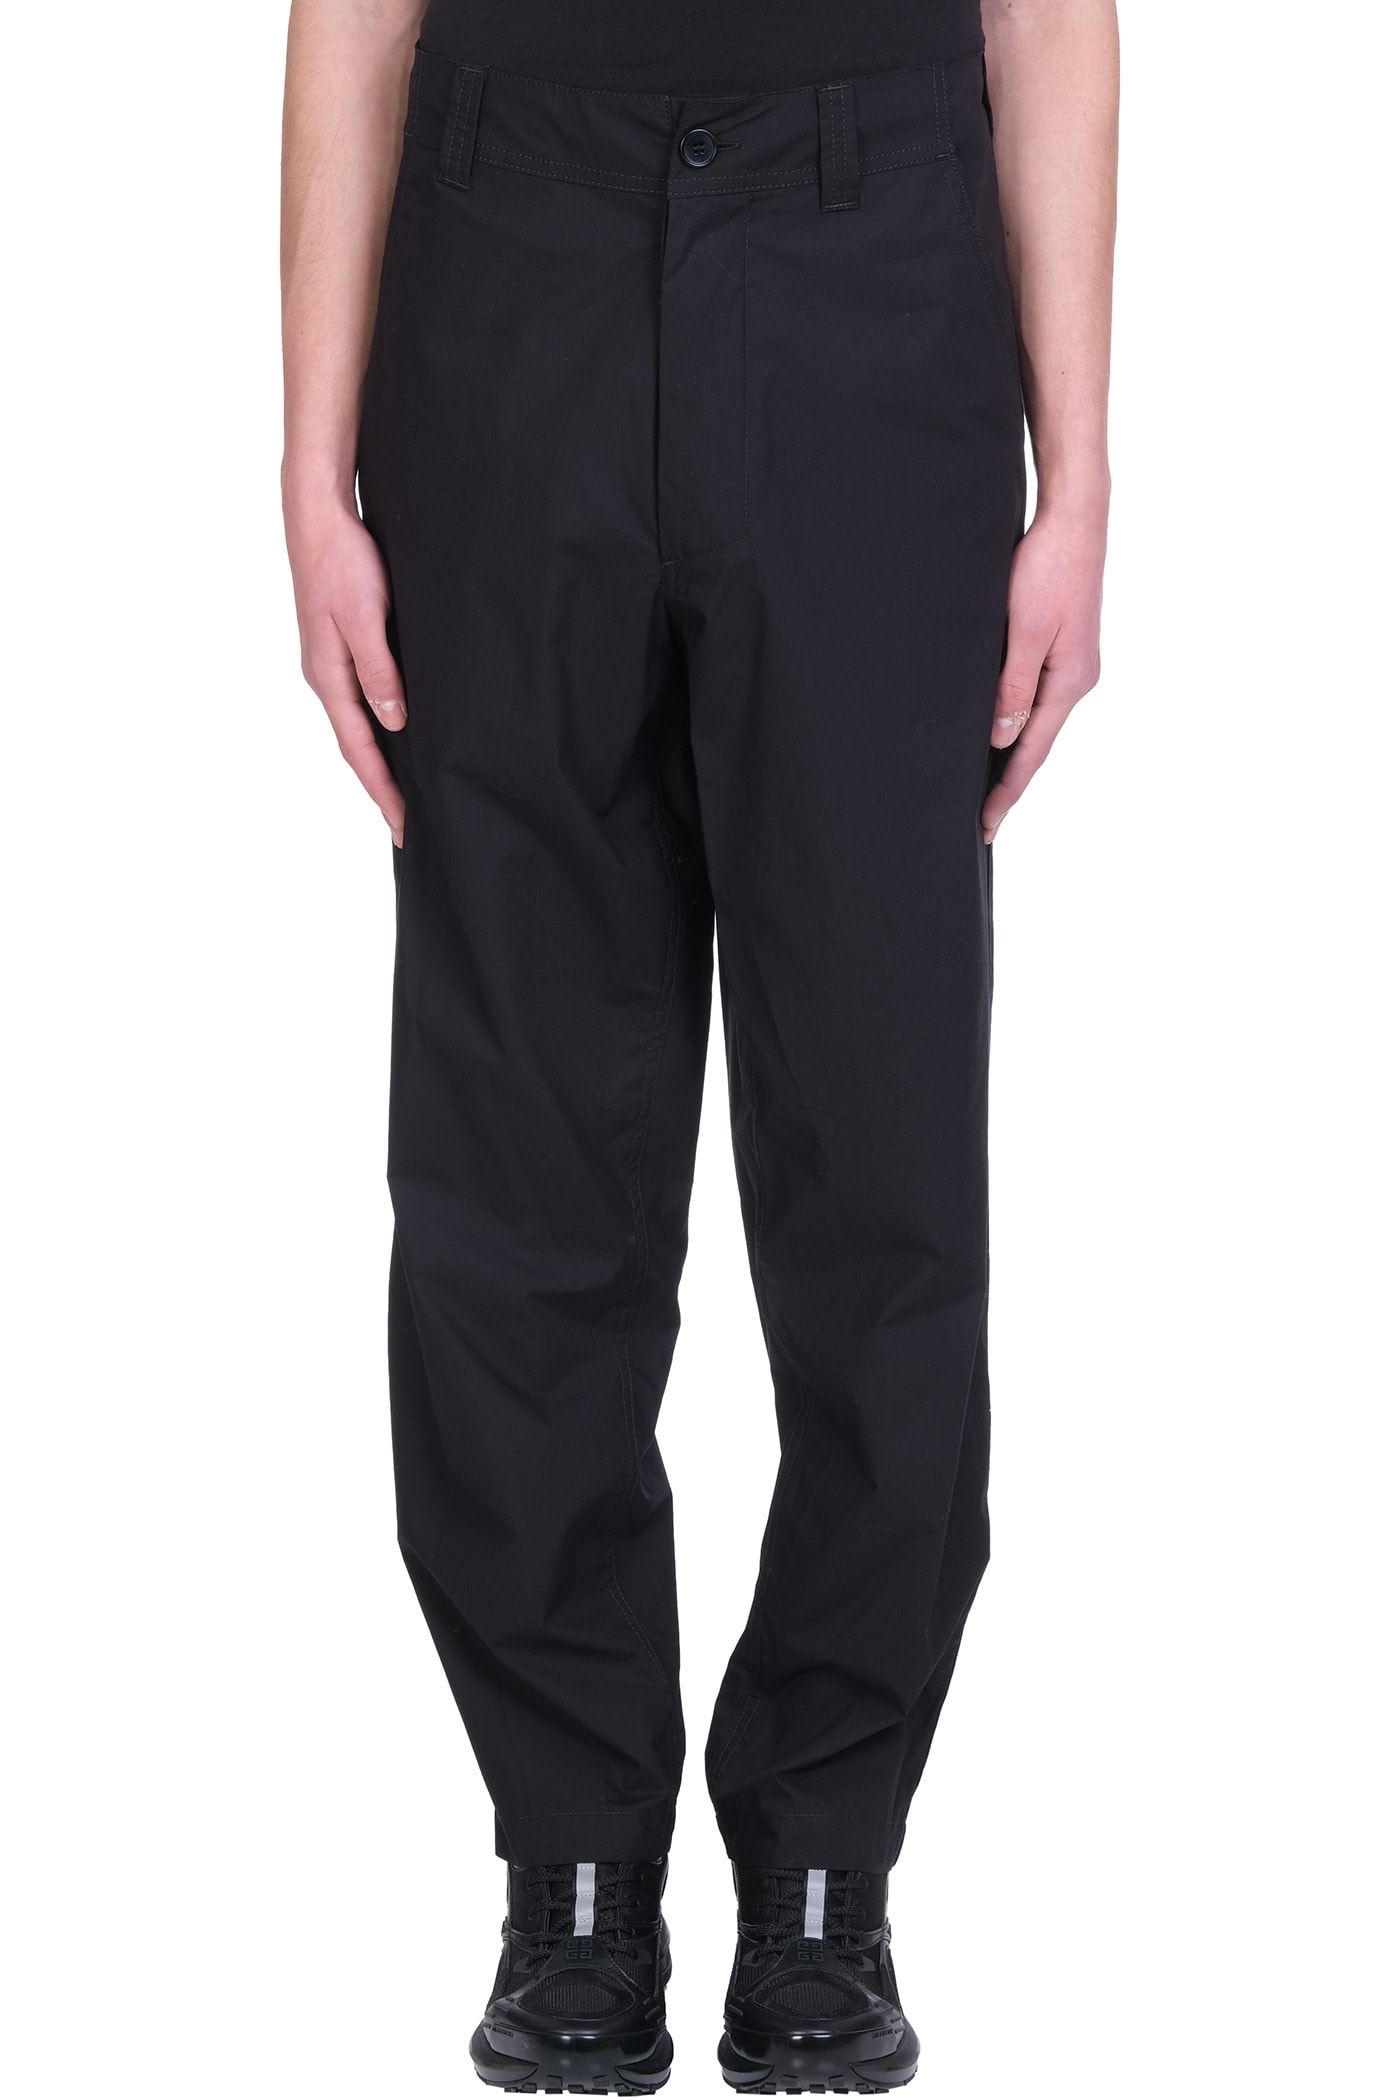 44 Label Group Pants In Black Cotton